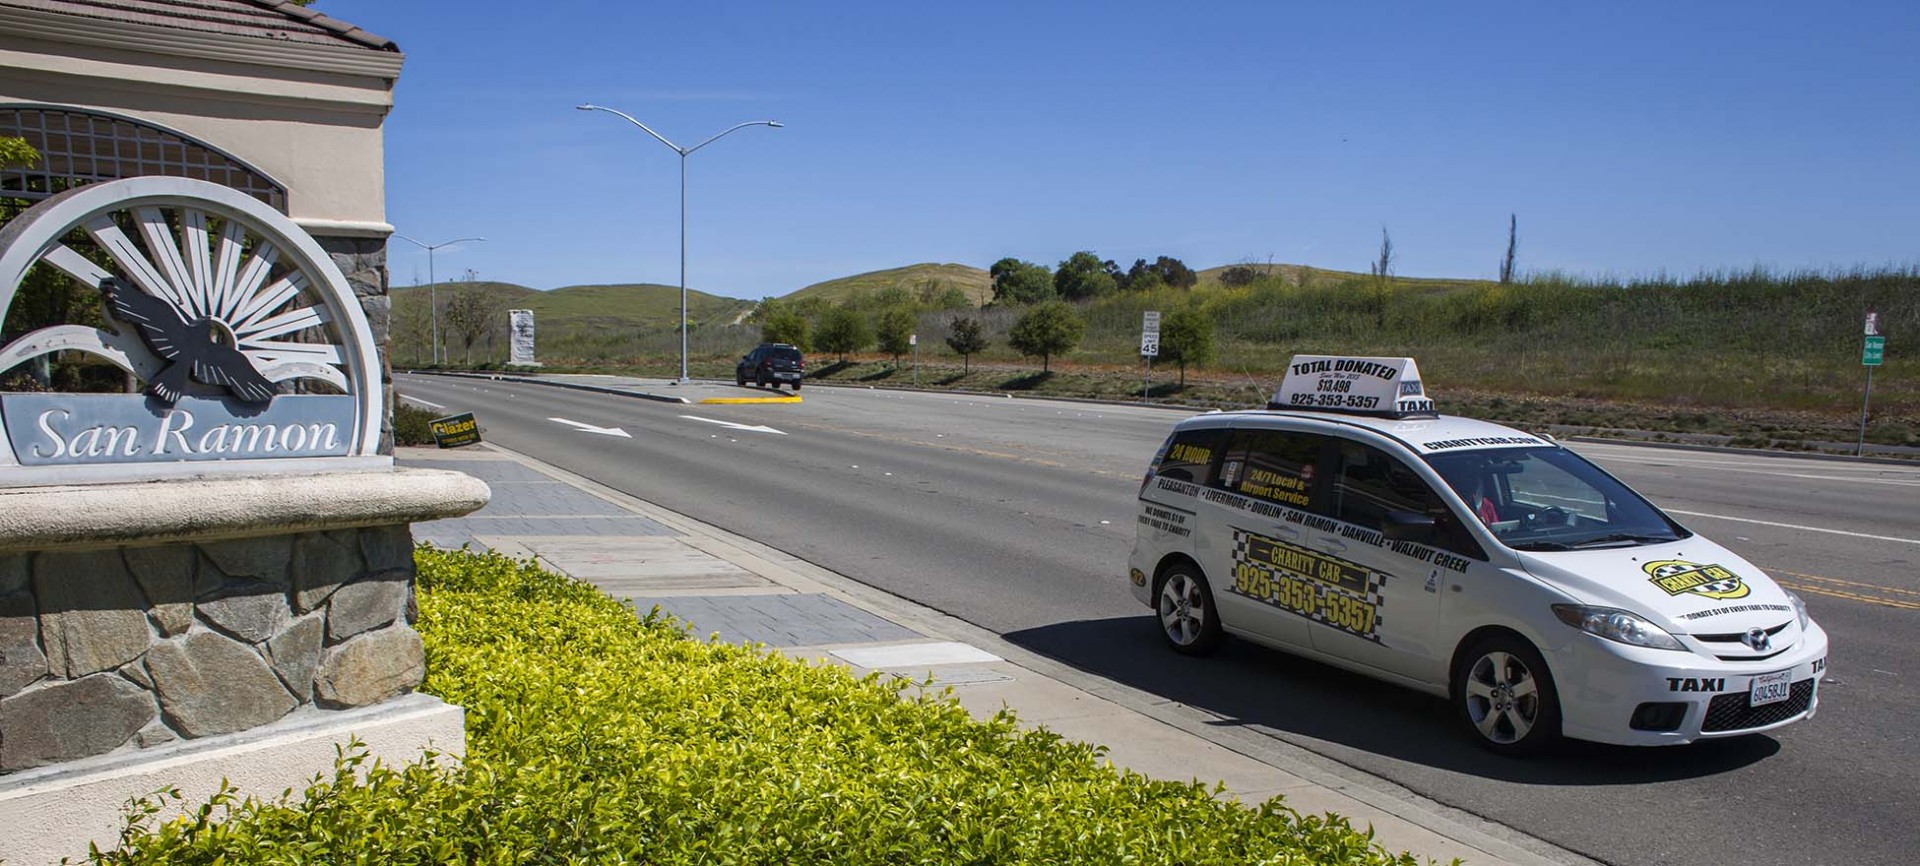 Charity Cab taxi drives by San Ramon city sign